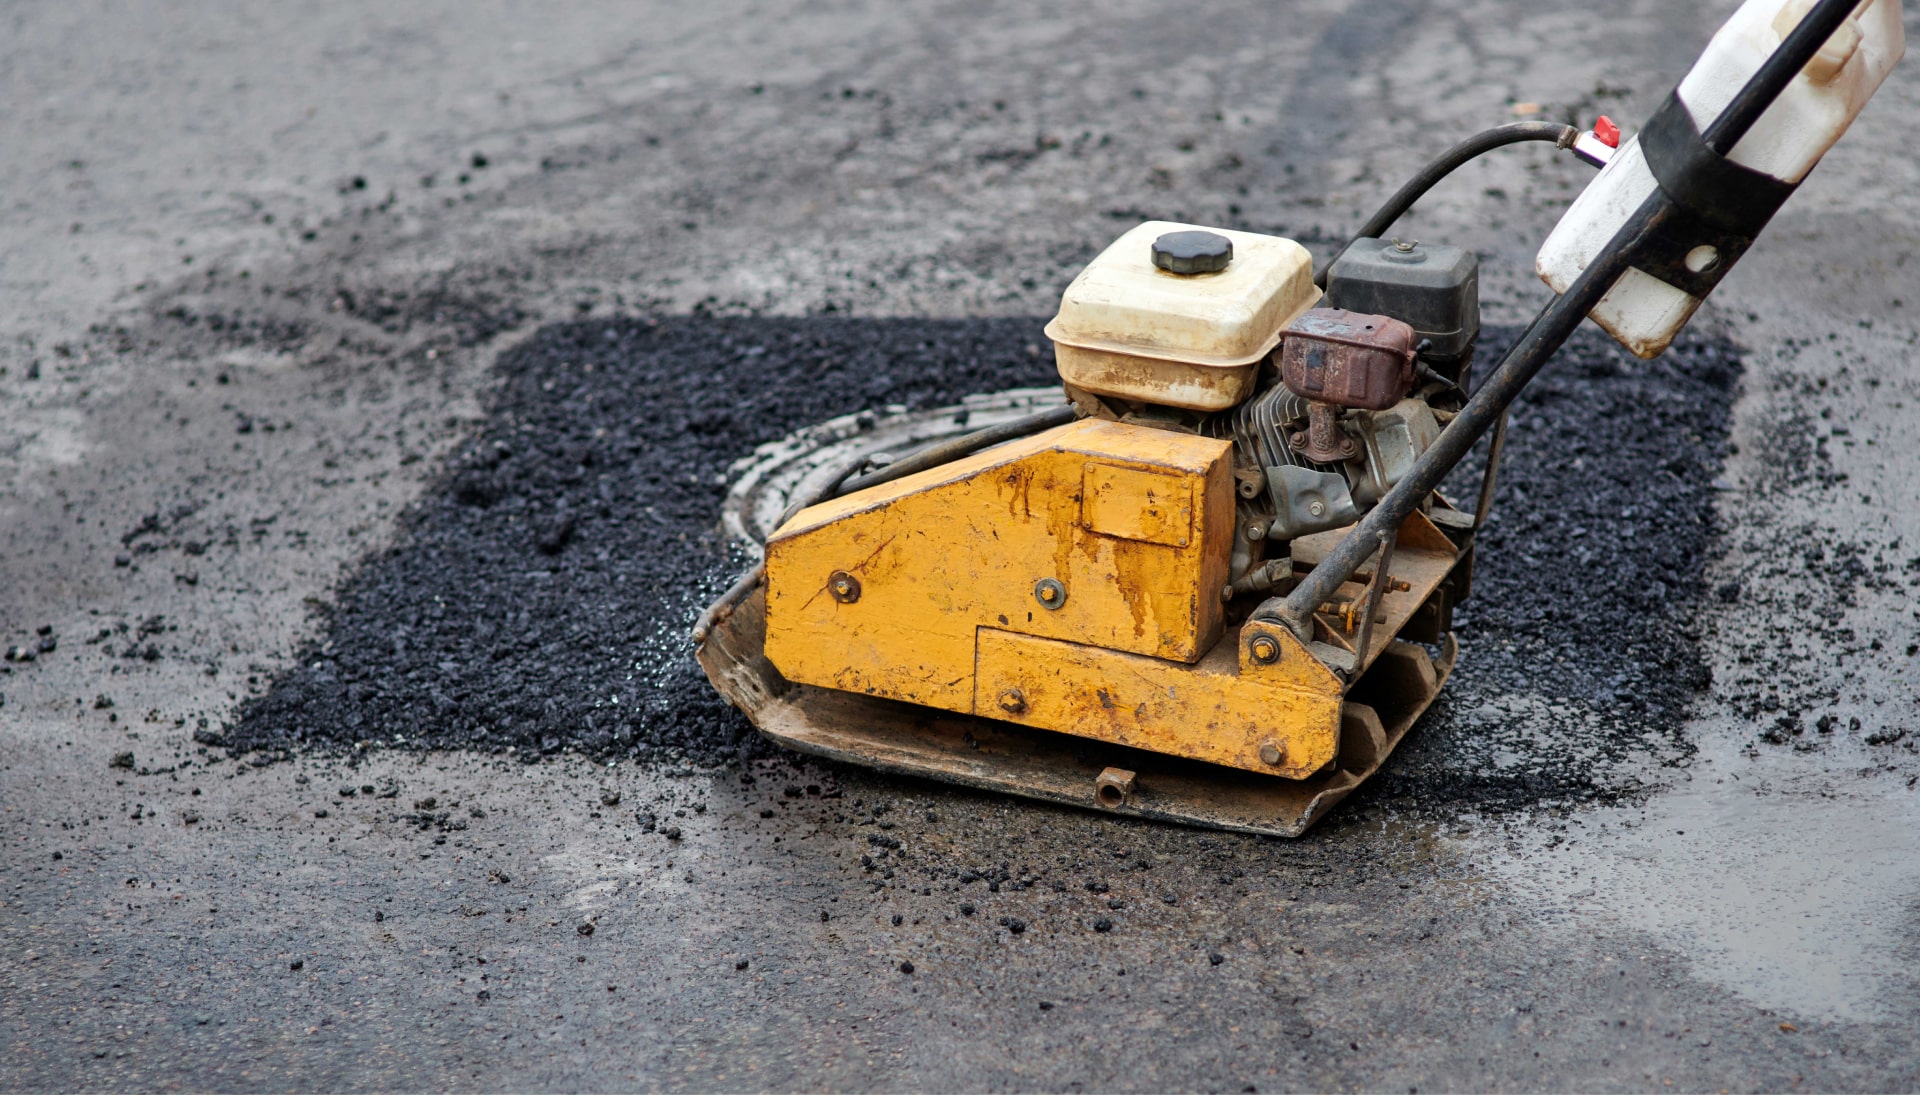 A small asphalt repair machine is used to create a small asphalt patch on a road in Saint Paul, MN.